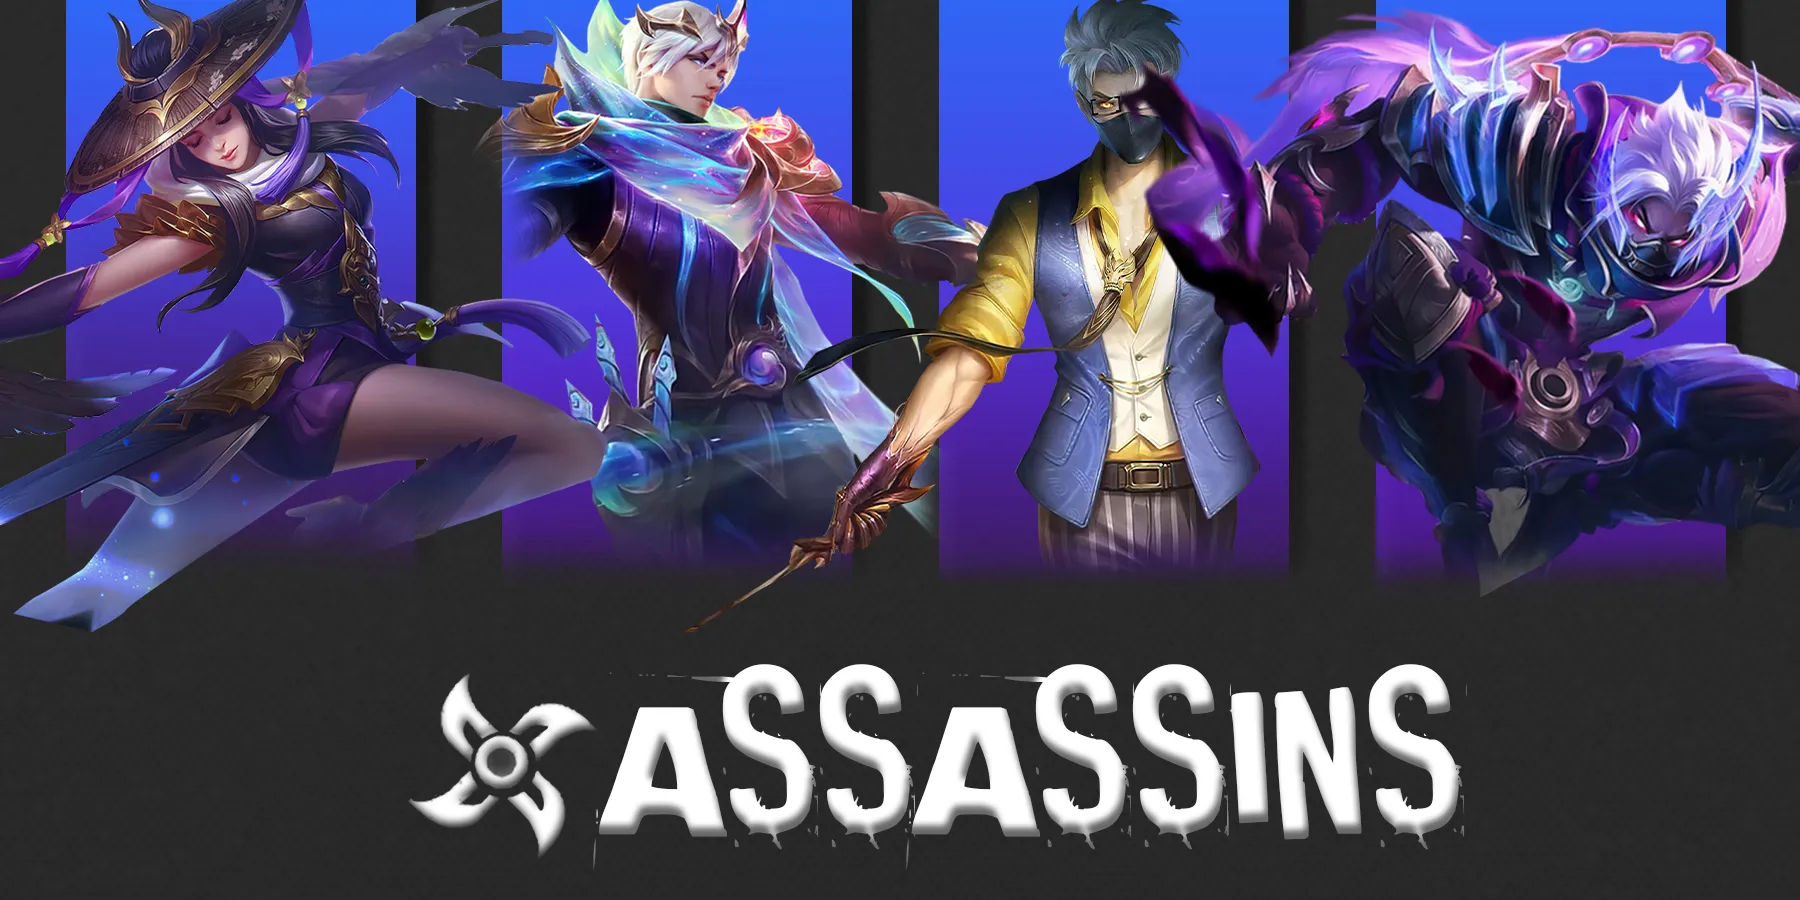 assassins to counter revamped aurora in mobile legends bang bang